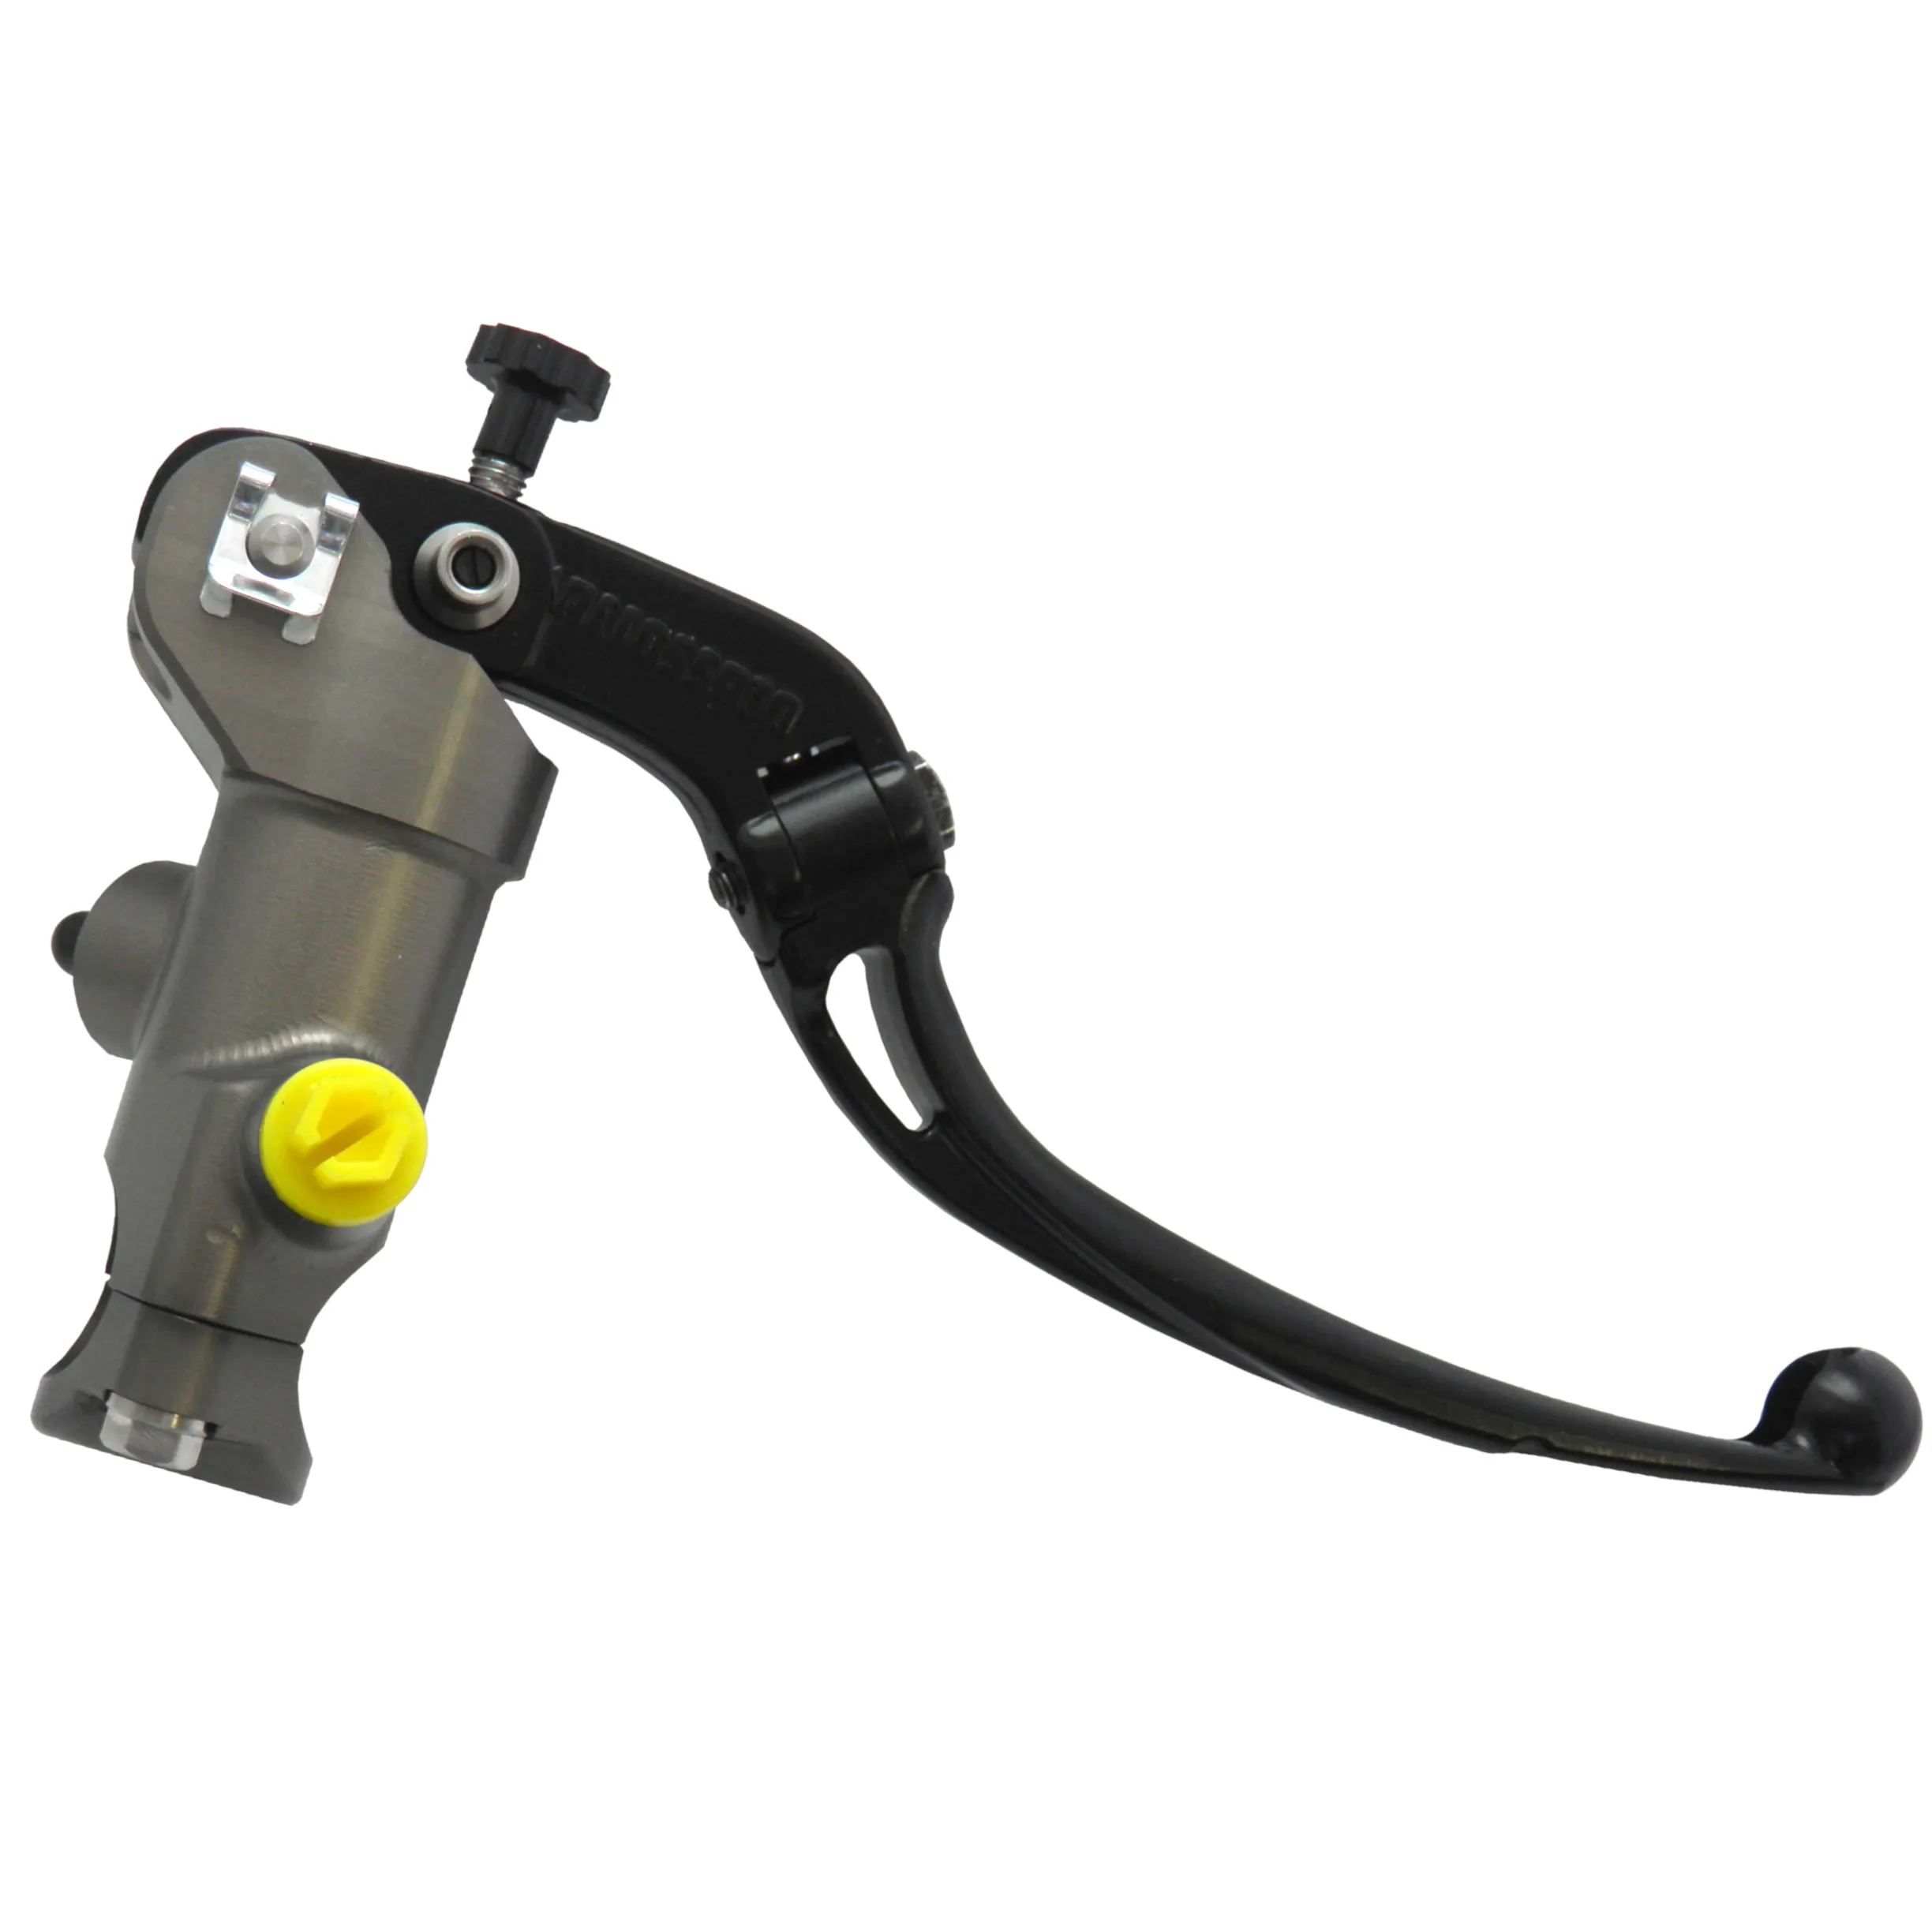 Best Sale Product 19 Piston Brake Cylinder Tool Made Of Aluminium Type Of Folding Lever Made In Italy